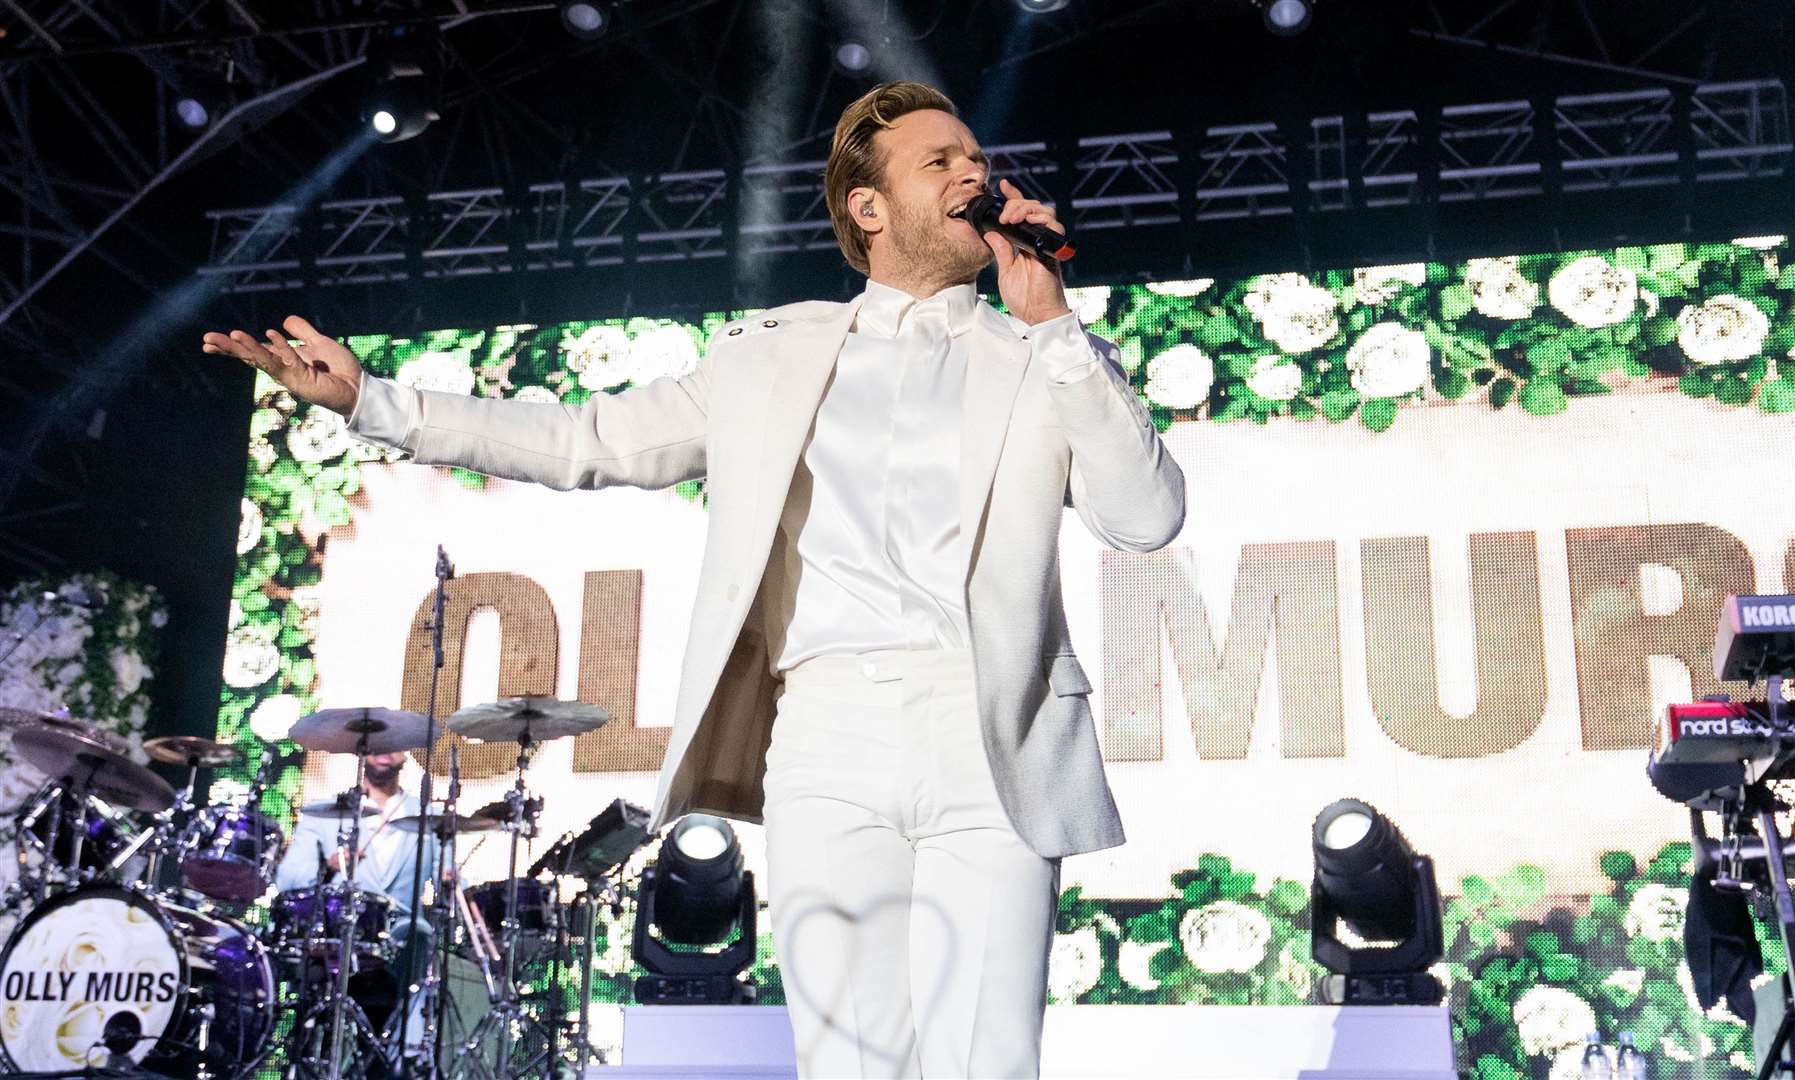 Olly Murs is just one of the artists who has performed at Dreamland as part of the Margate Summer Series this year. Picture: Jasmine Marceau